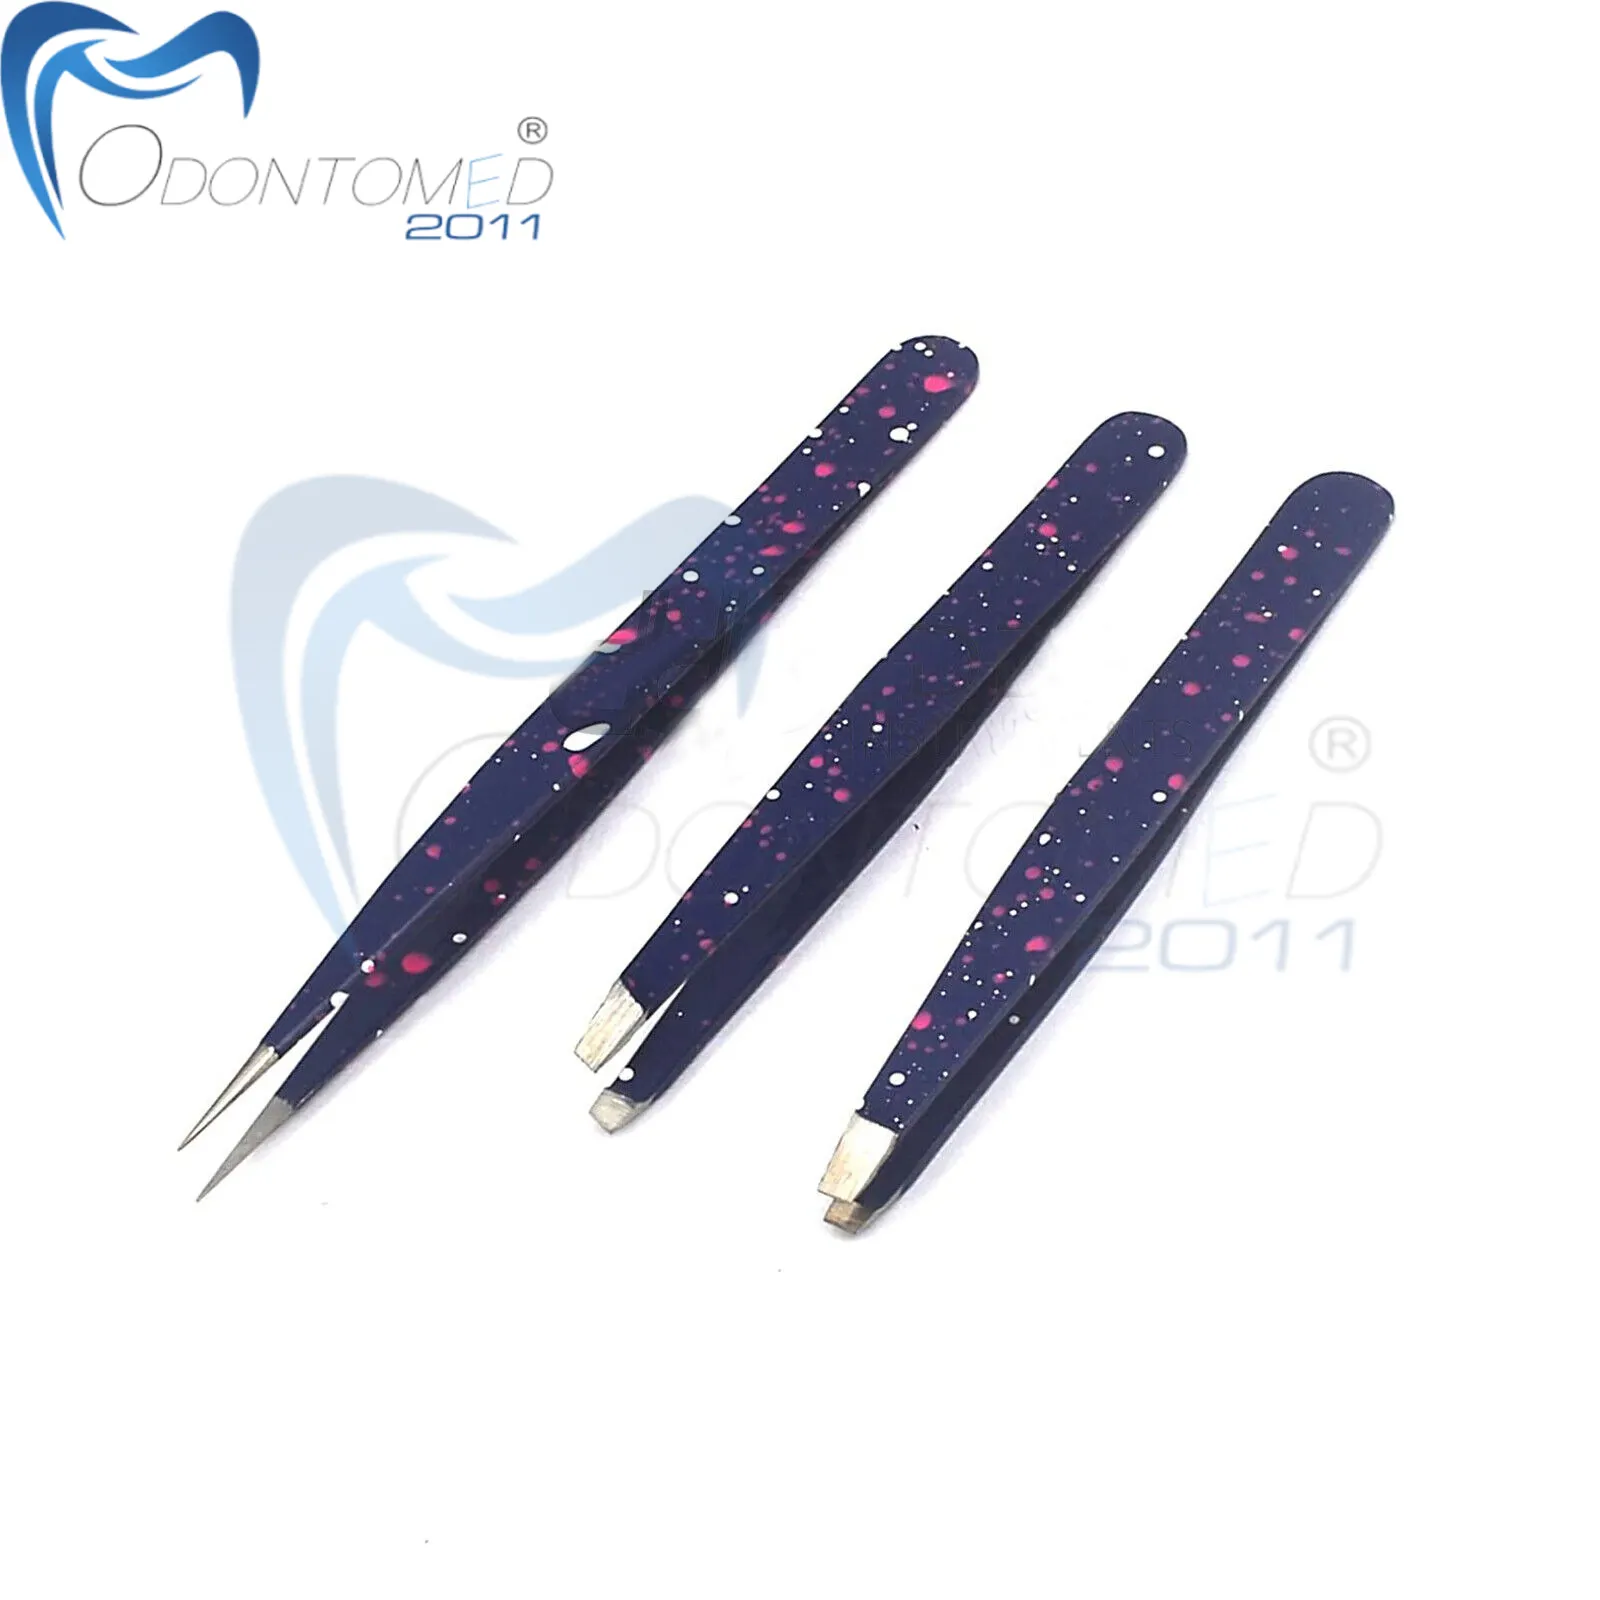 3 Piece Tweezers Set With Slant, Straight And Pointed Tips Best For Eyebrow, Ingrown Hair And Splinters (Blue & White) Odontomed